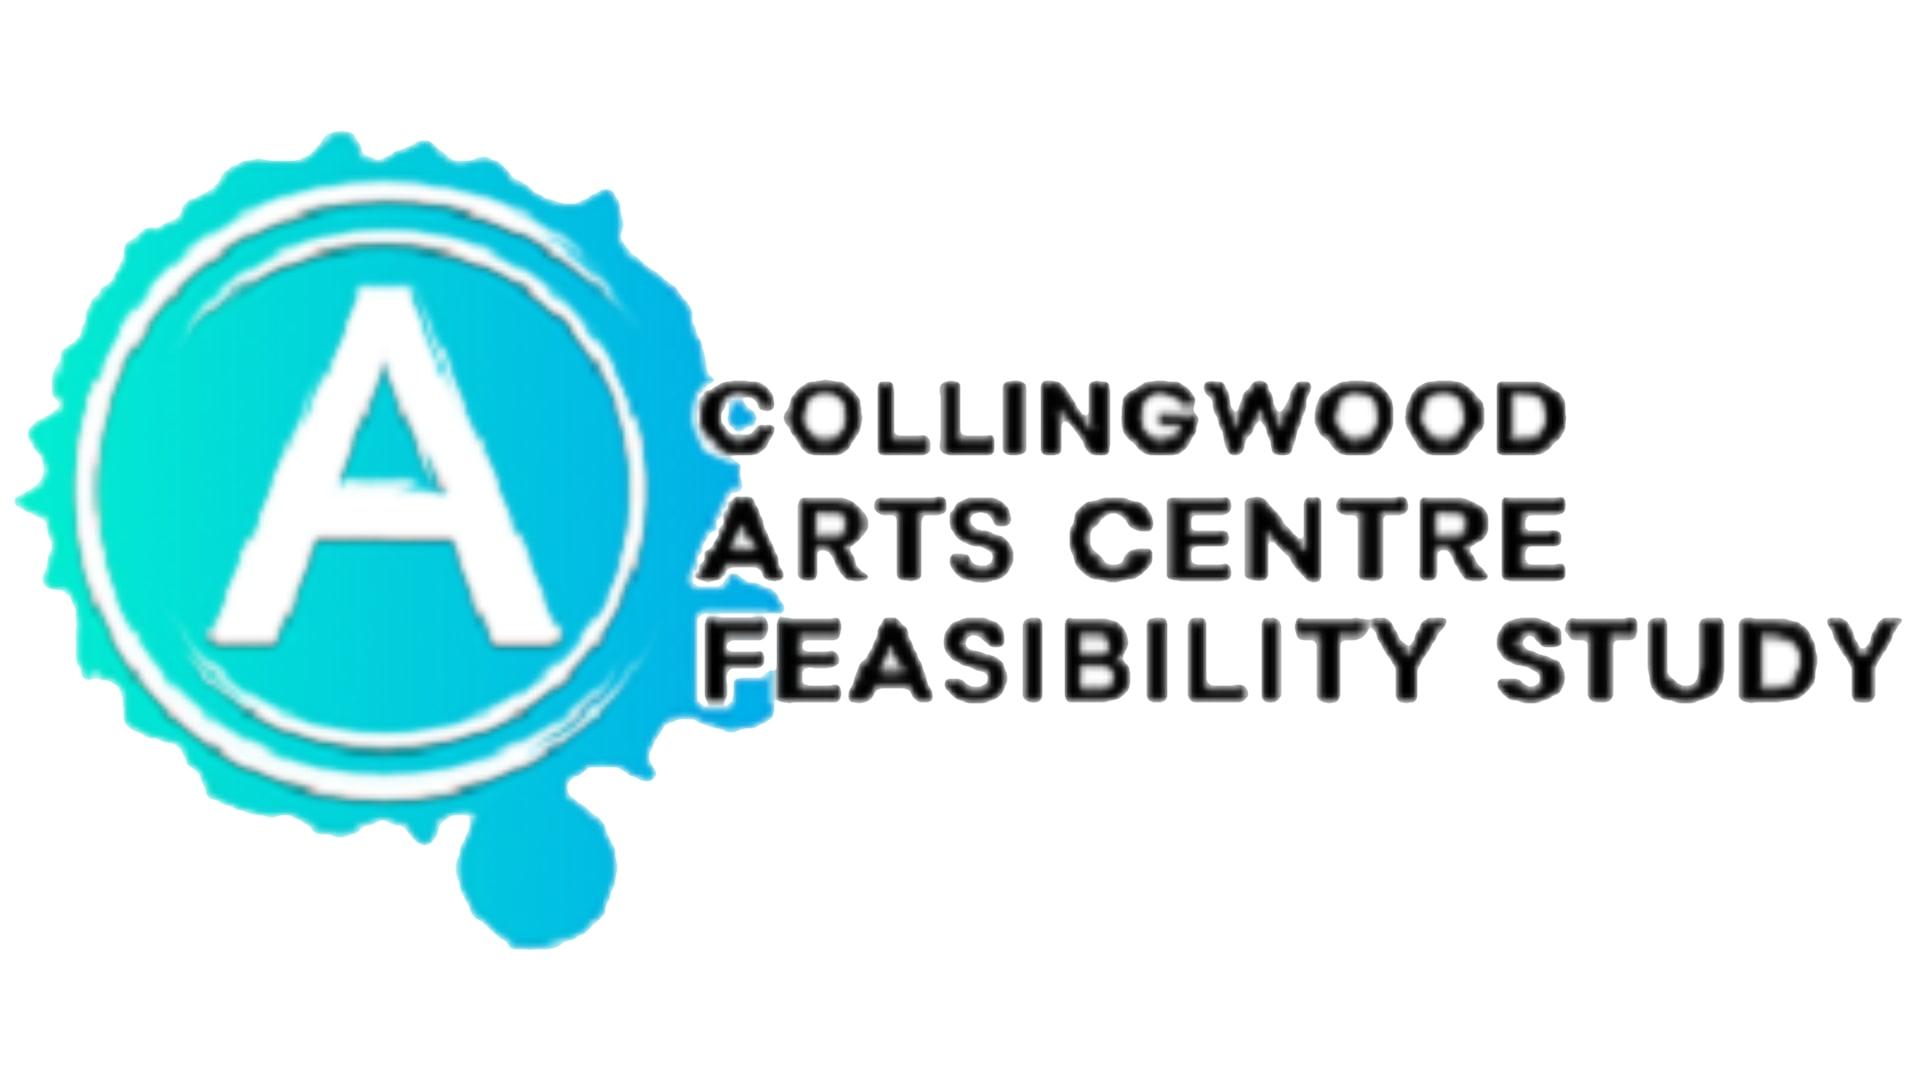 Collingwood Arts Centre Feasibility Study – Phase 3 Update